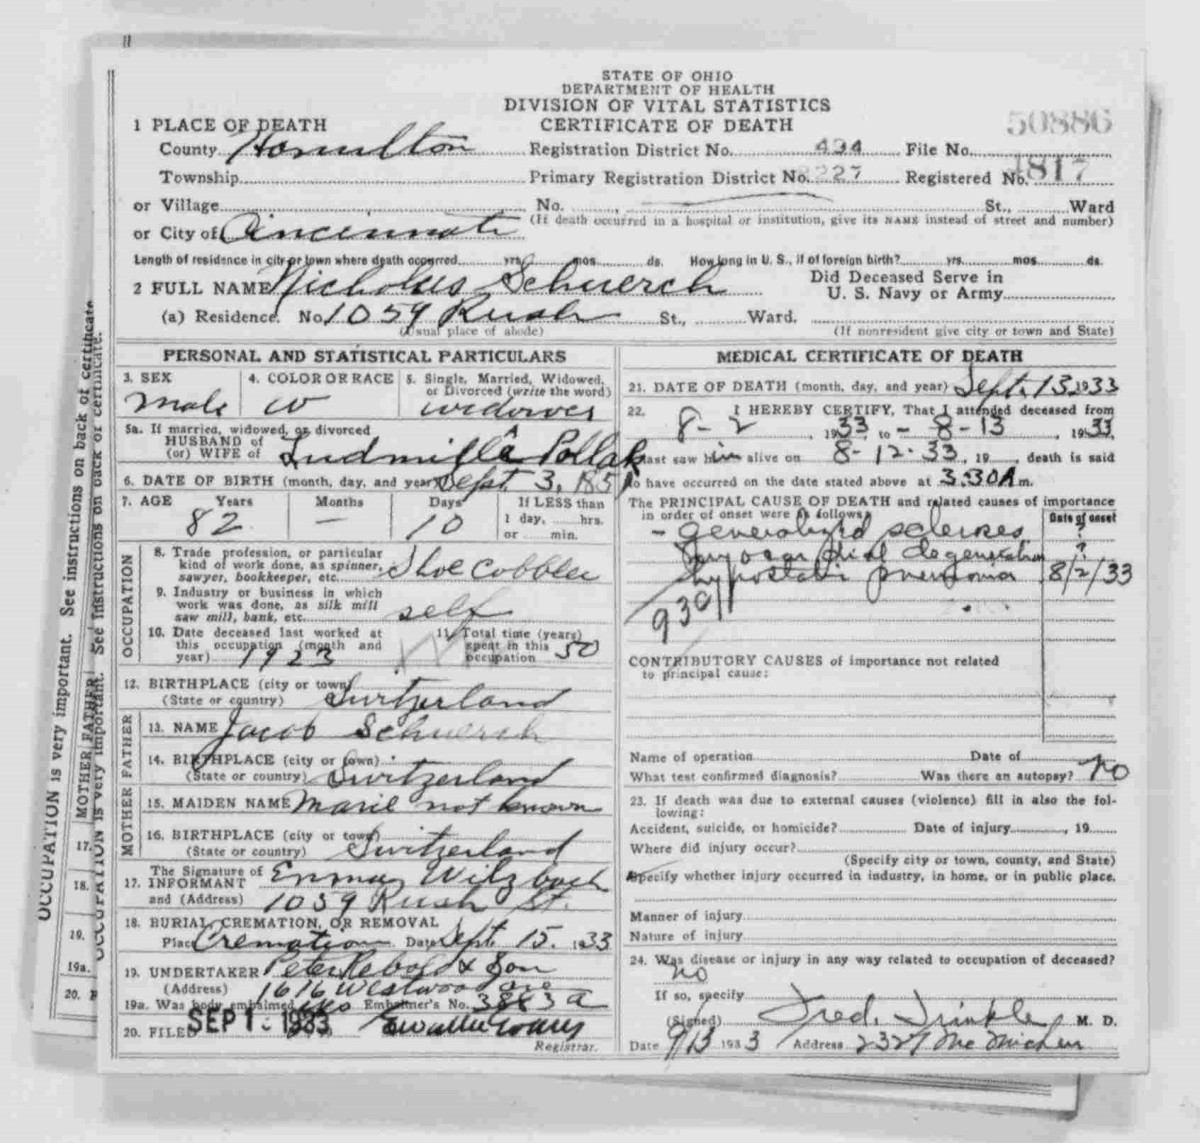 By reading every item on the original image of a death certificate, I discovered the names of my great-great grandparents.